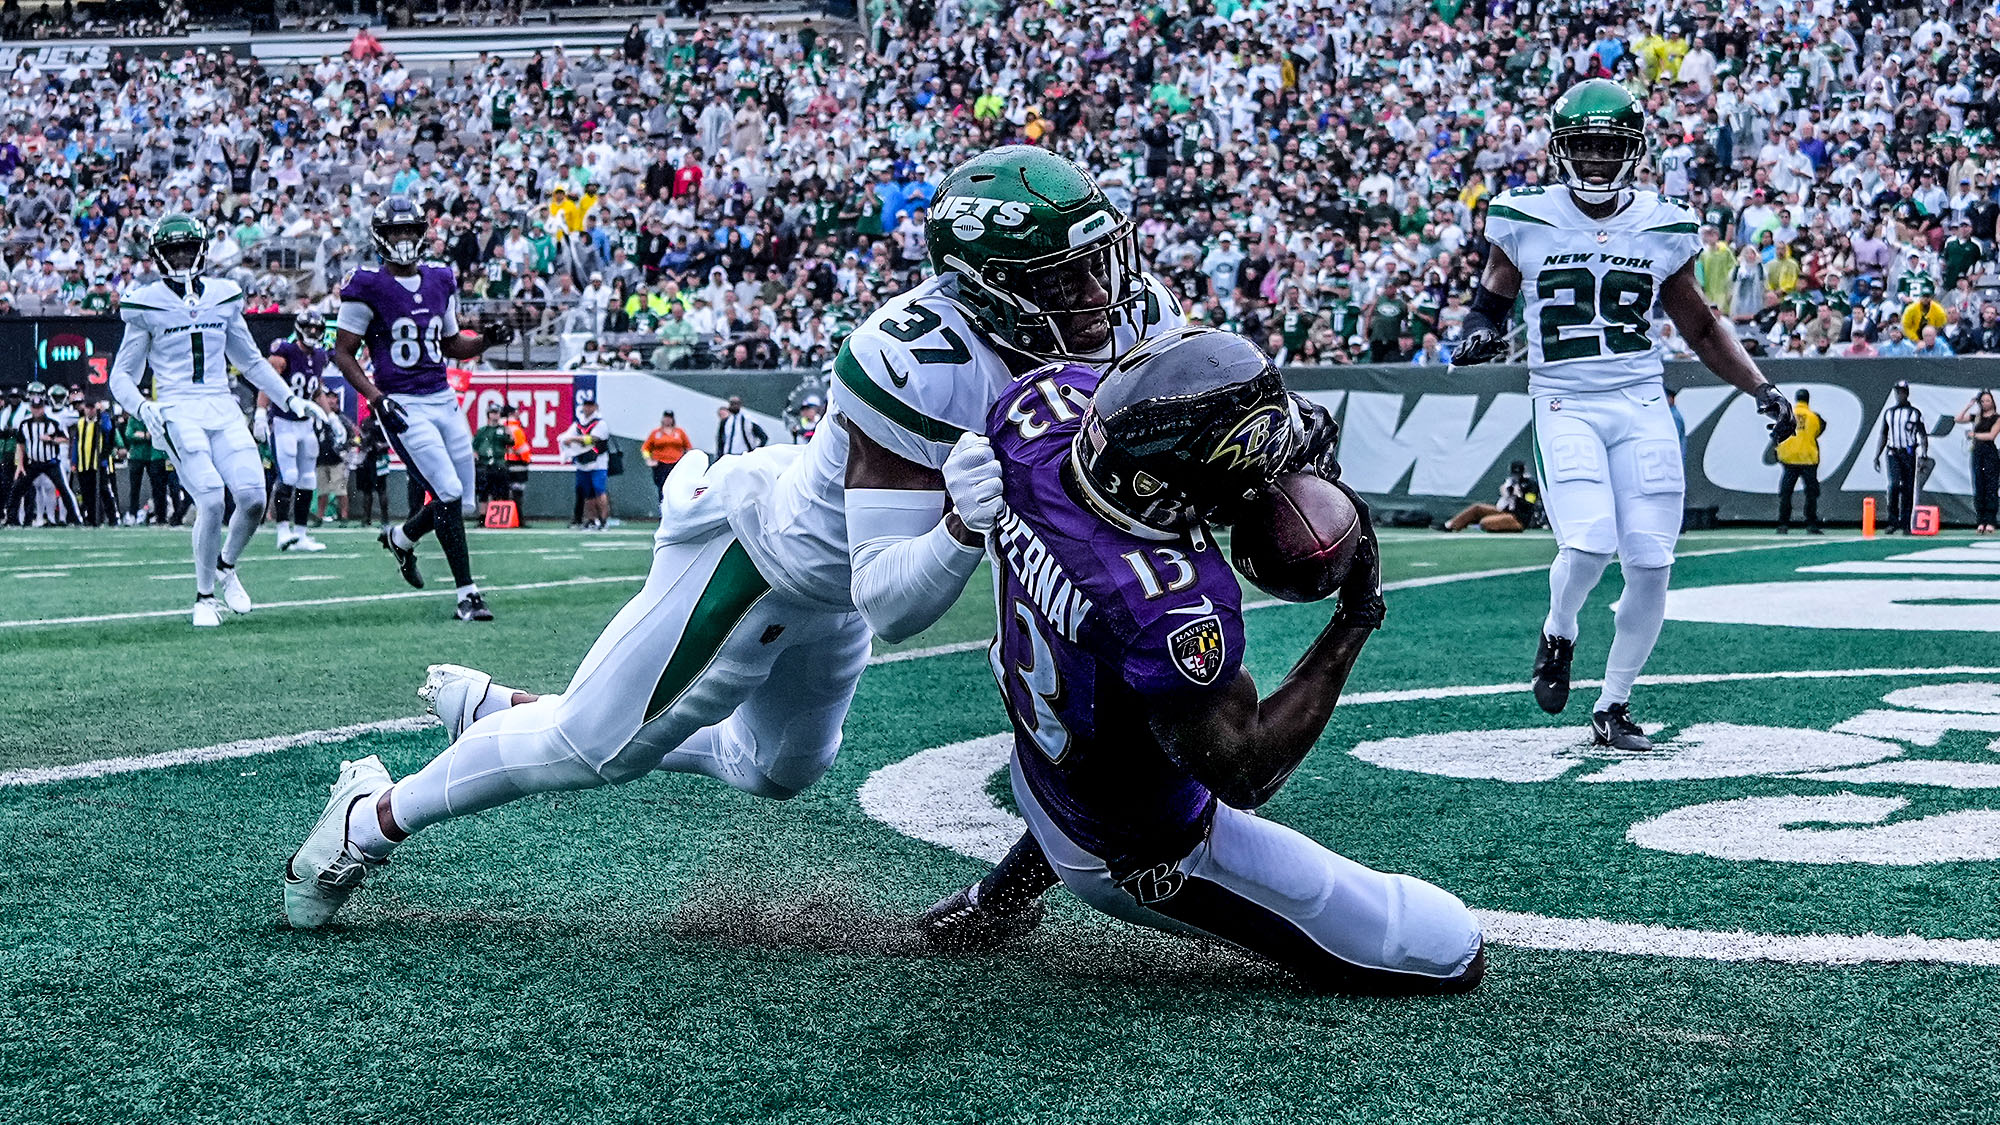 After solid start, NY Jets flame out against Baltimore Ravens, 24-3 ( Highlights)